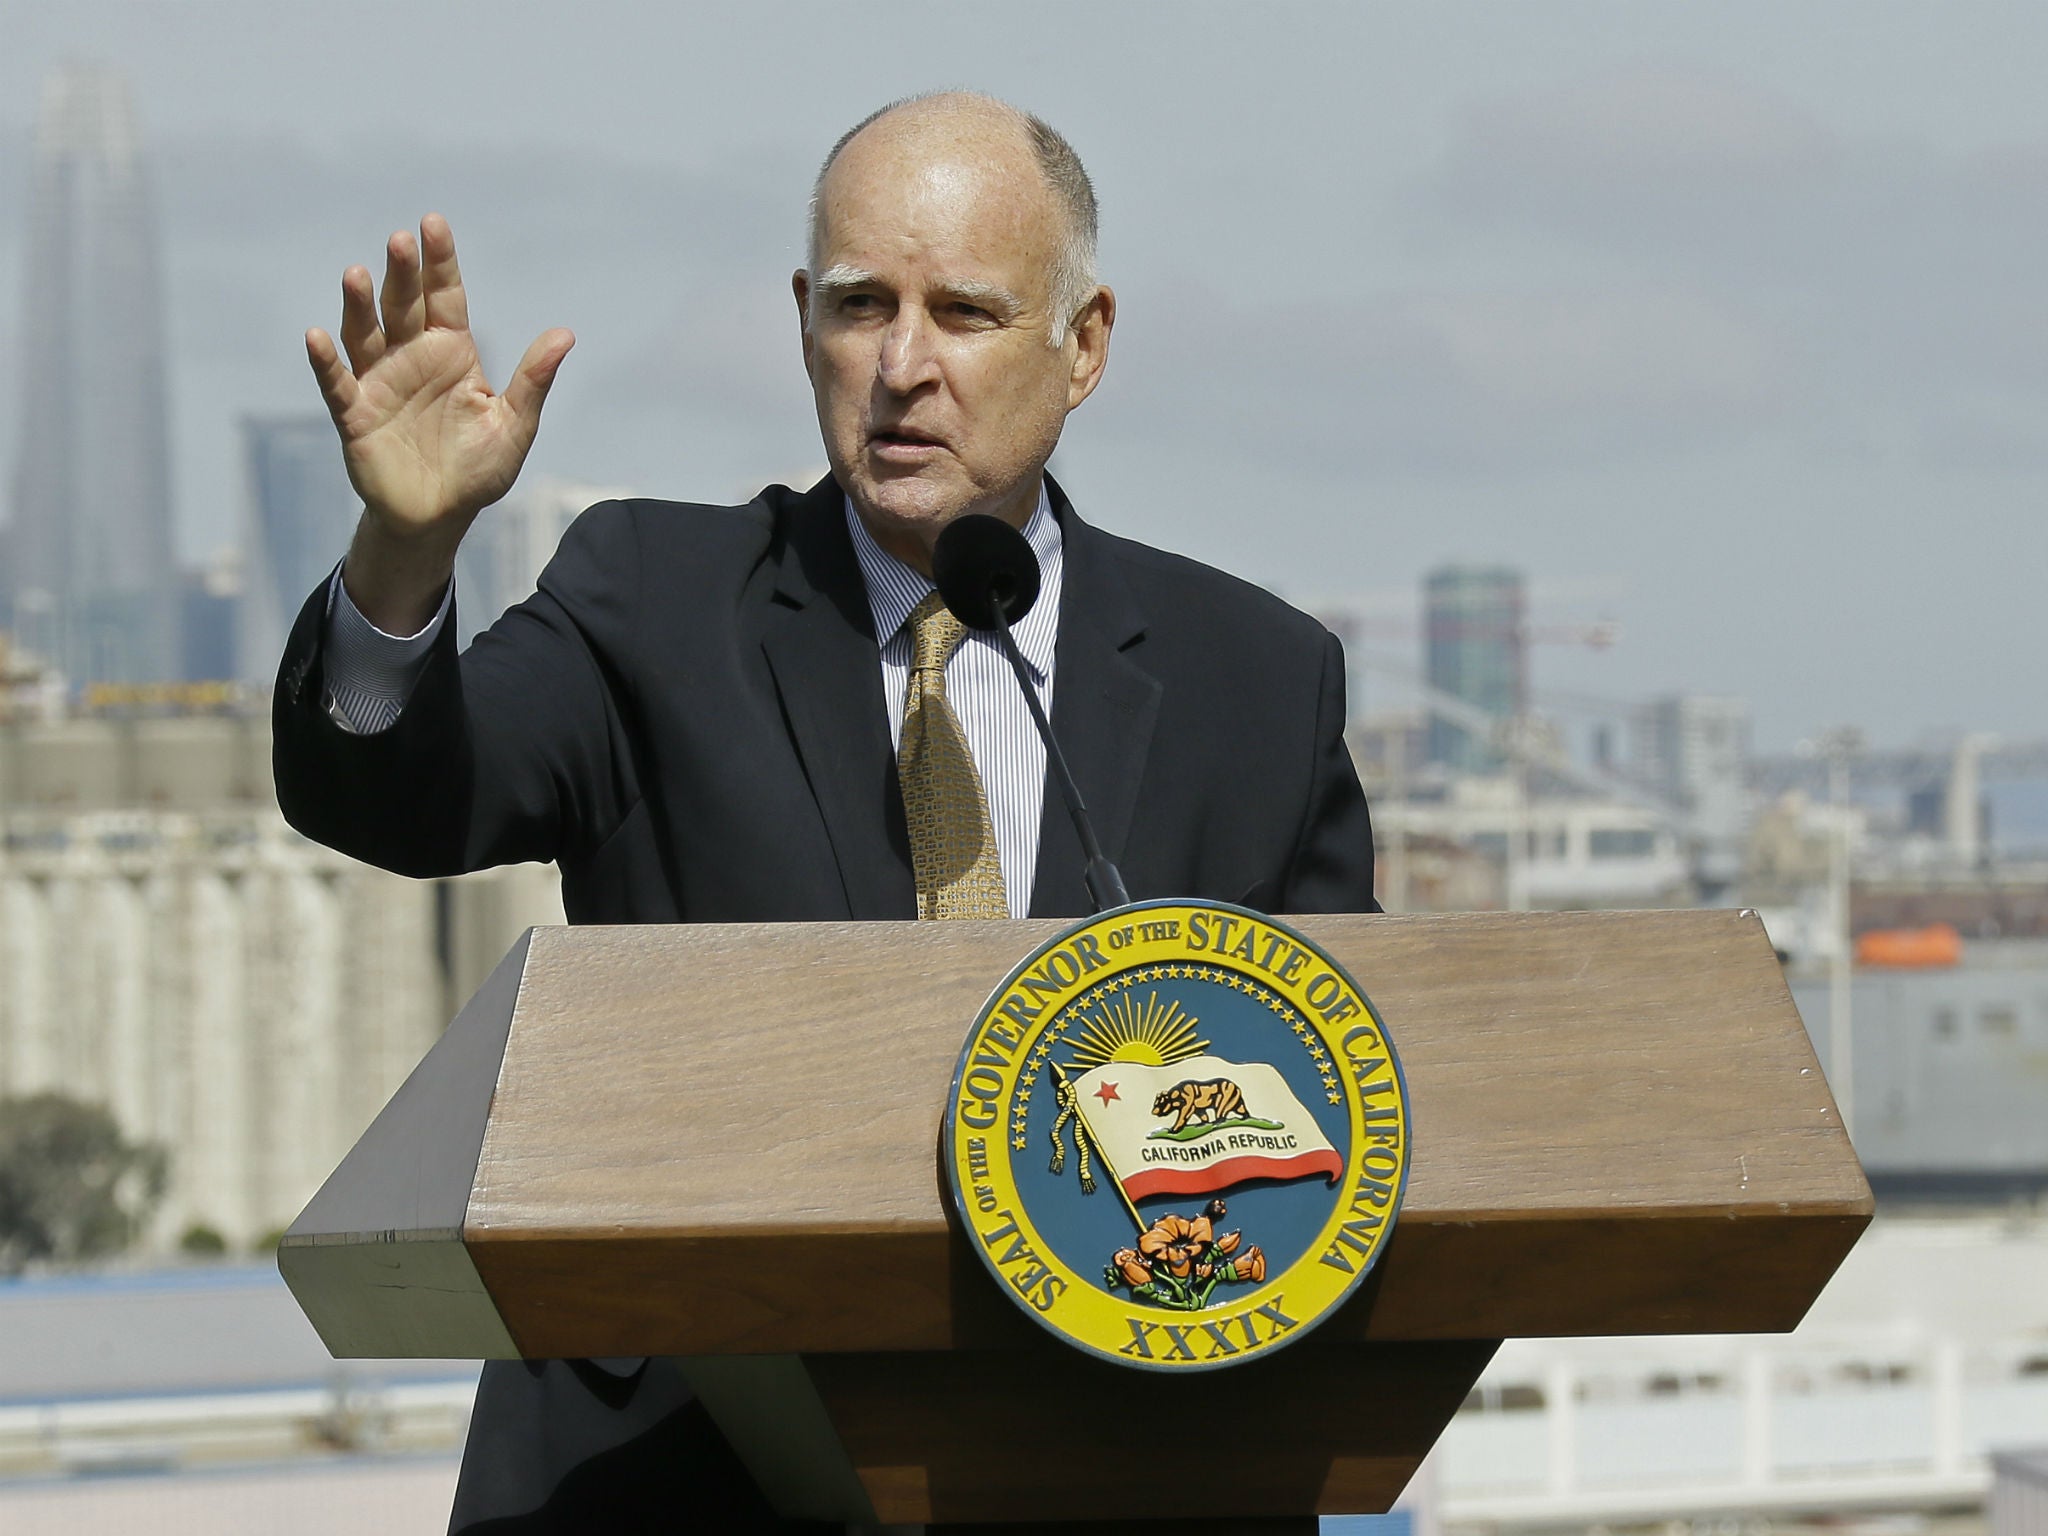 California Gov Jerry Brown, seen here on Sept. 29, 2017, in San Francisco, has struck a blow against the Trump administration's deportation efforts